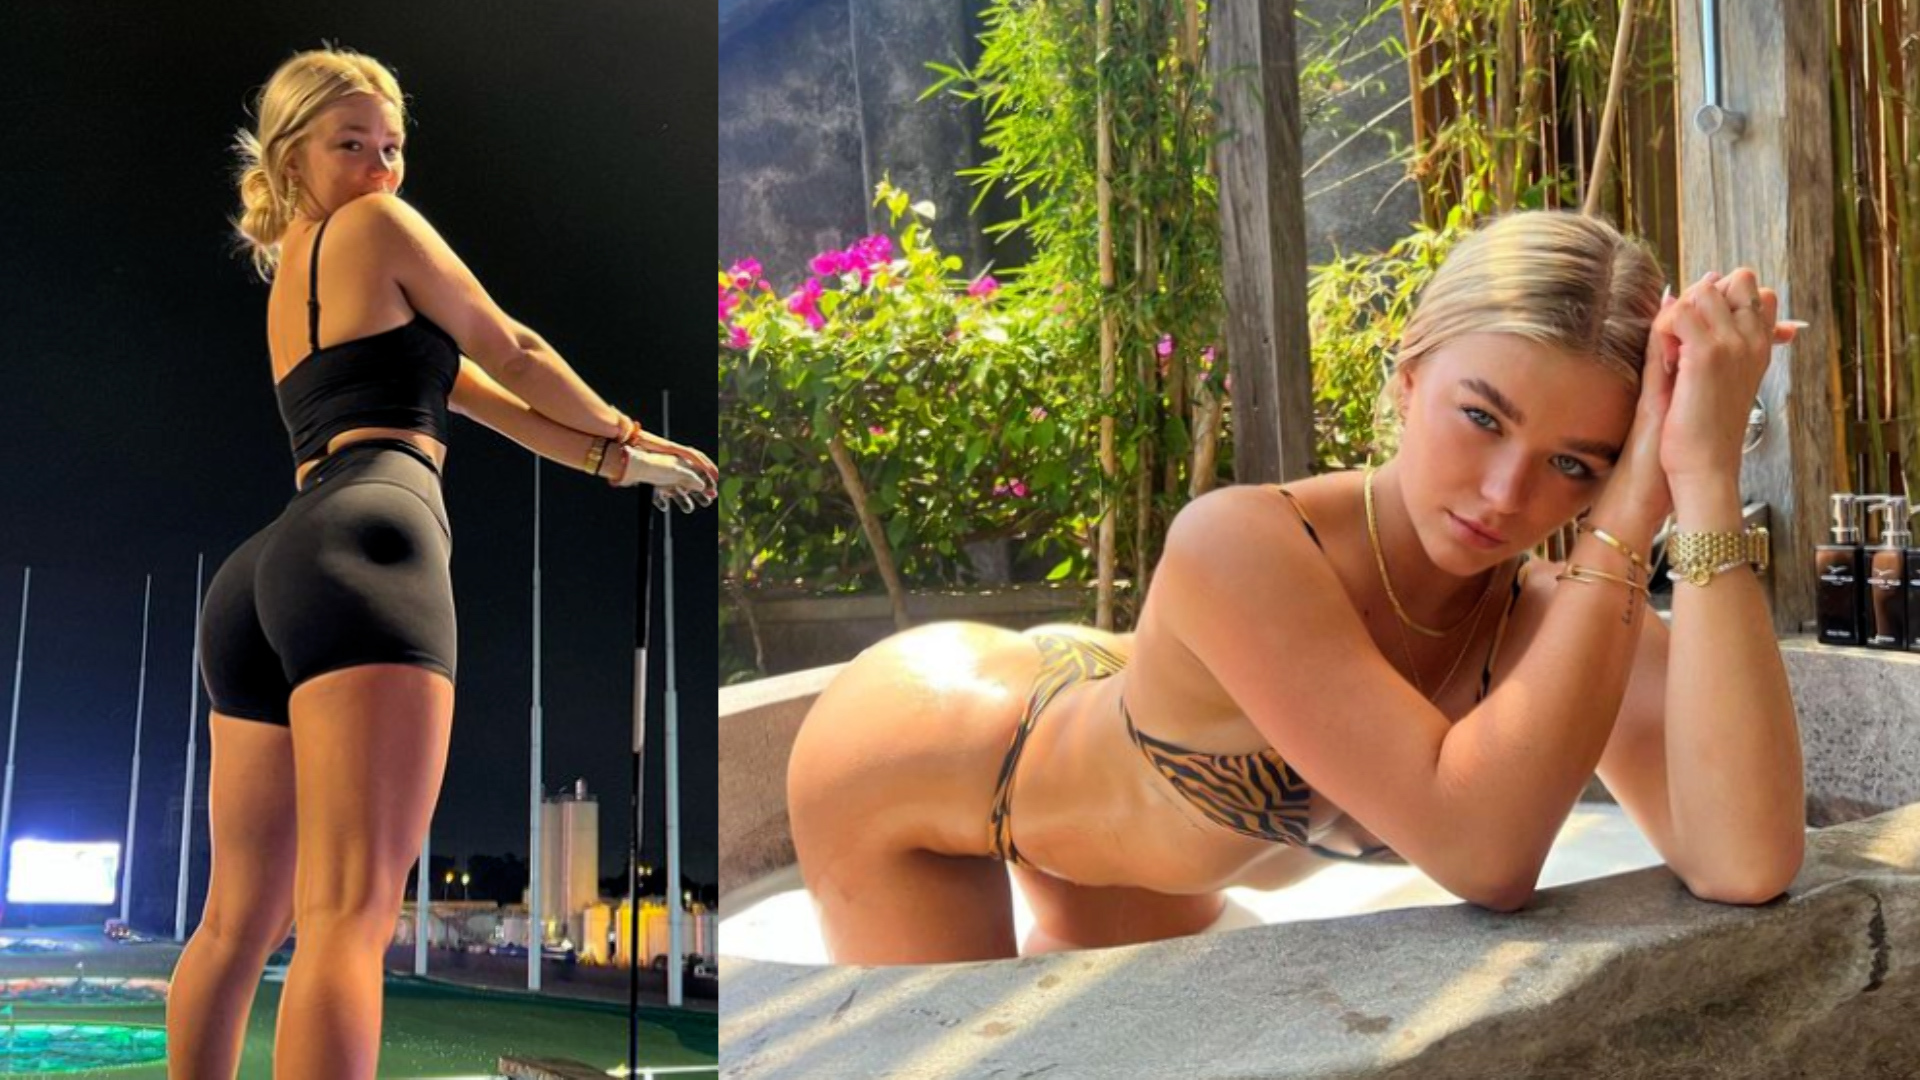 Paige Spiranac's biggest rival, Katie Sigmond, could face jail time for playing golf in Grand Canyon